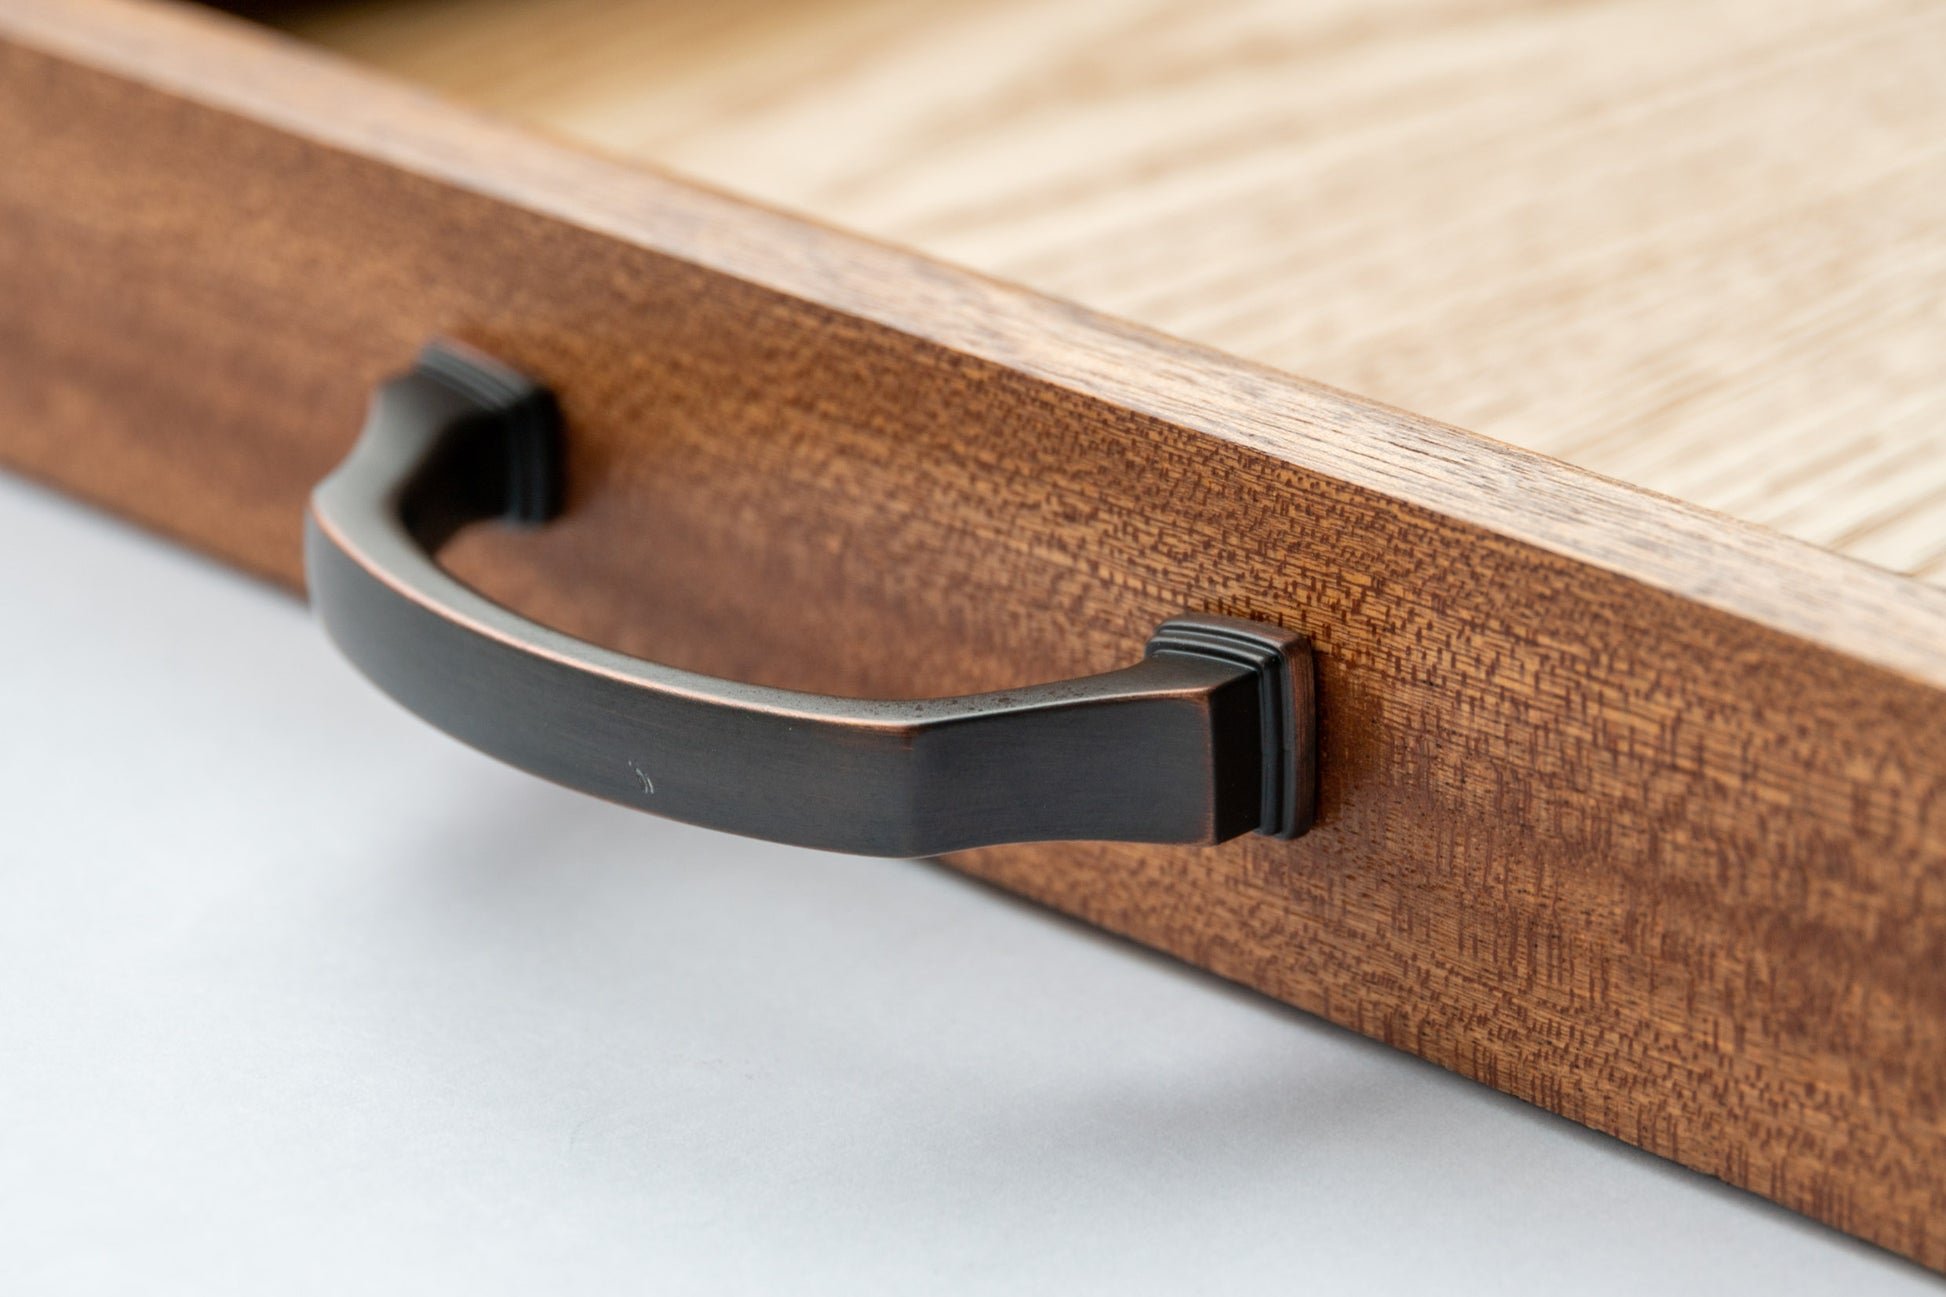 A close-up of the dark brass handles of our Luxury Serving Tray with Full Grain Leather. The black handle features a copper sheen and is securely installed to ensure care-free handling.